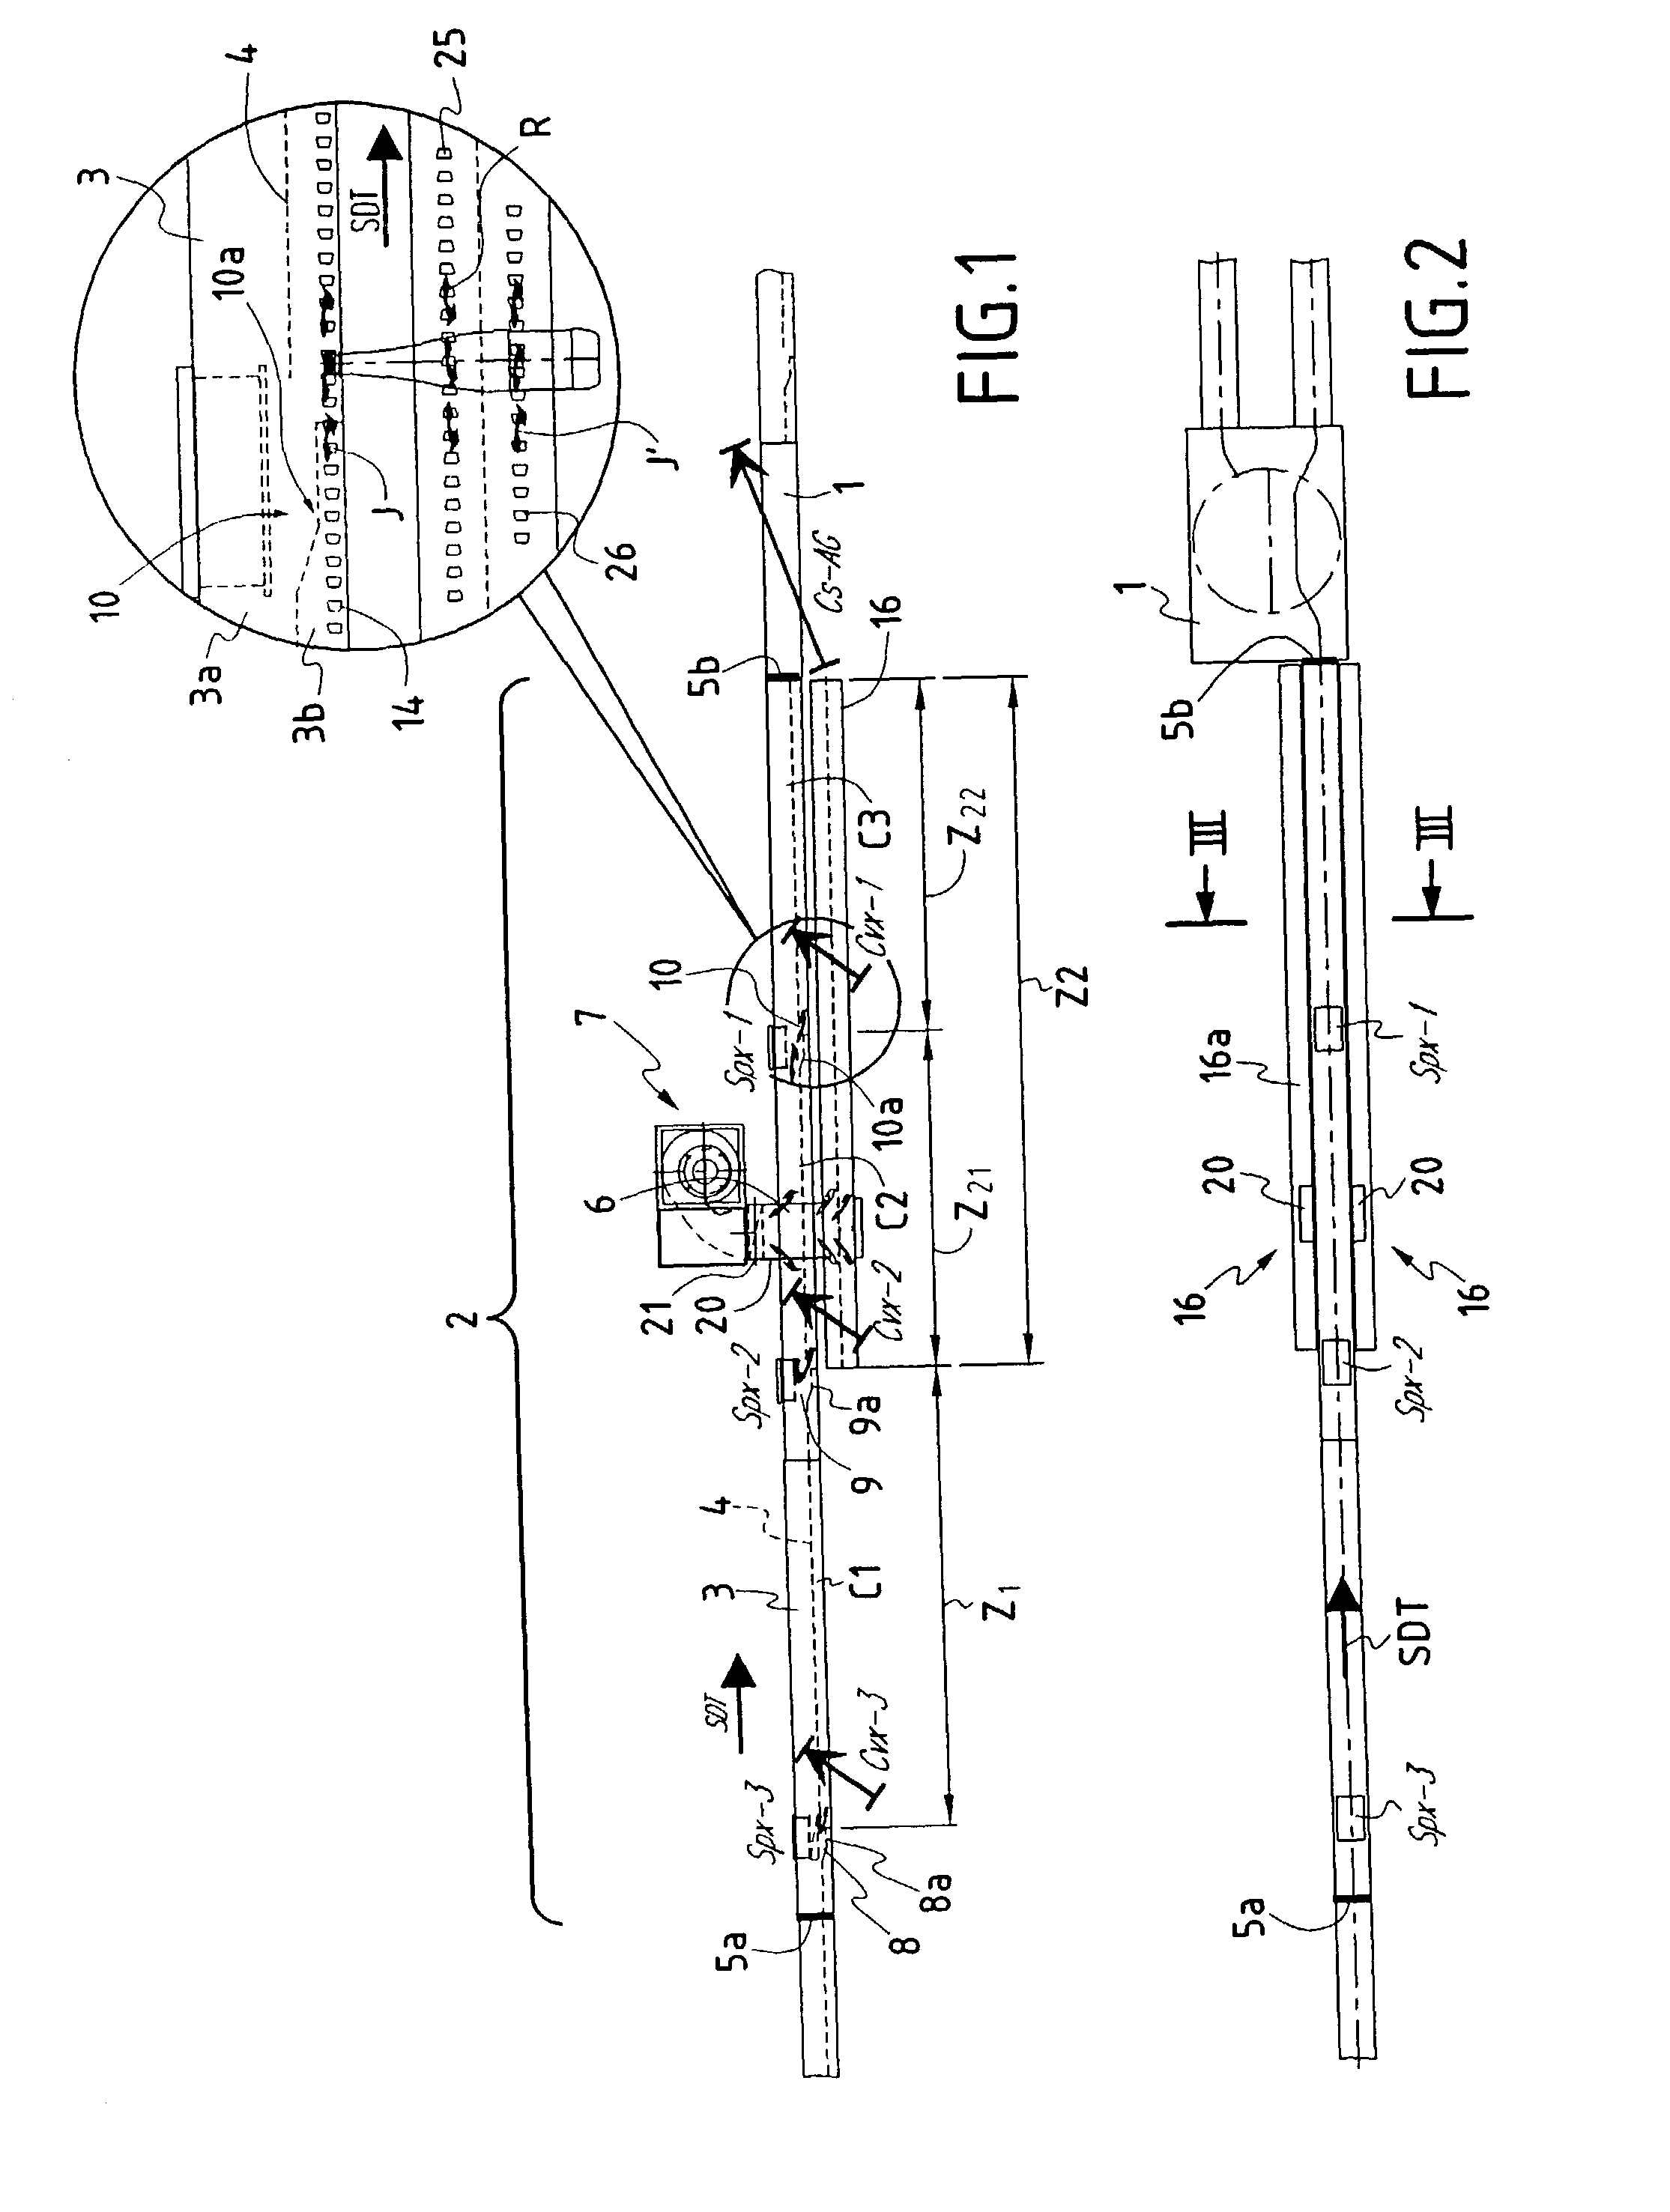 Method for forming a train of suspended objects transported under the influence of air jets, and conveying section for carrying out said method